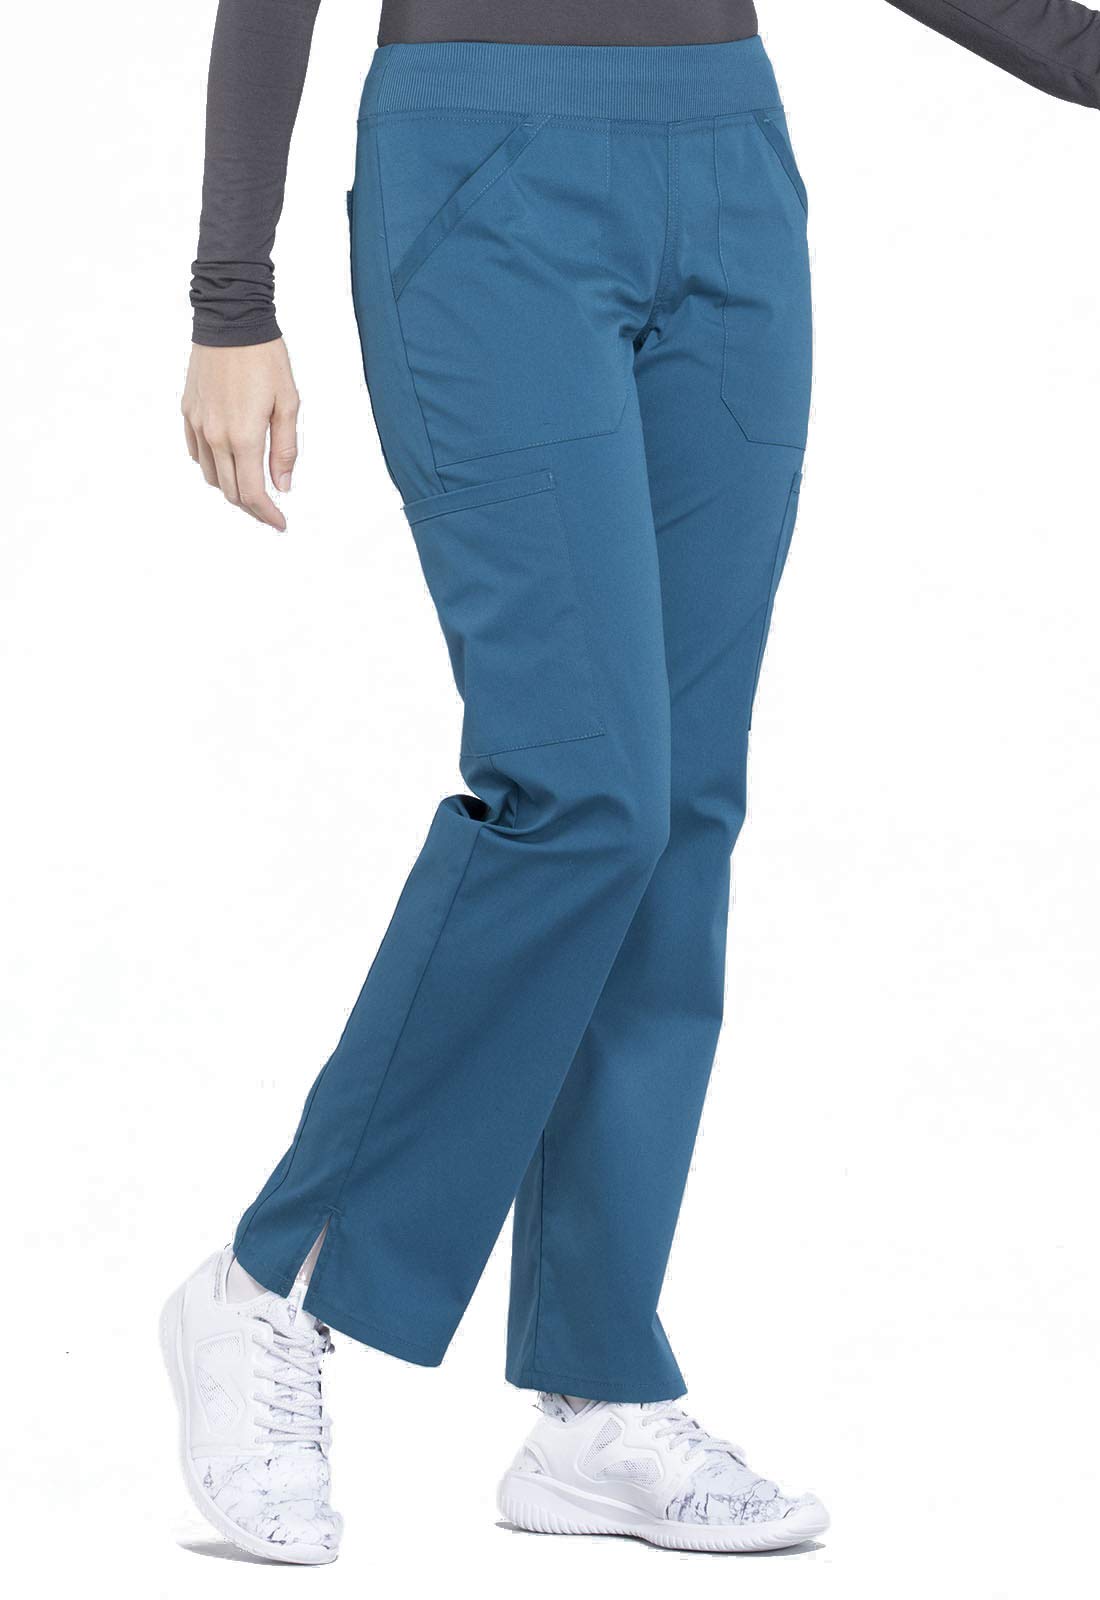 Workwear Professionals Scrubs for Women Pull-On Cargo Pant, Soft Stretch WW170